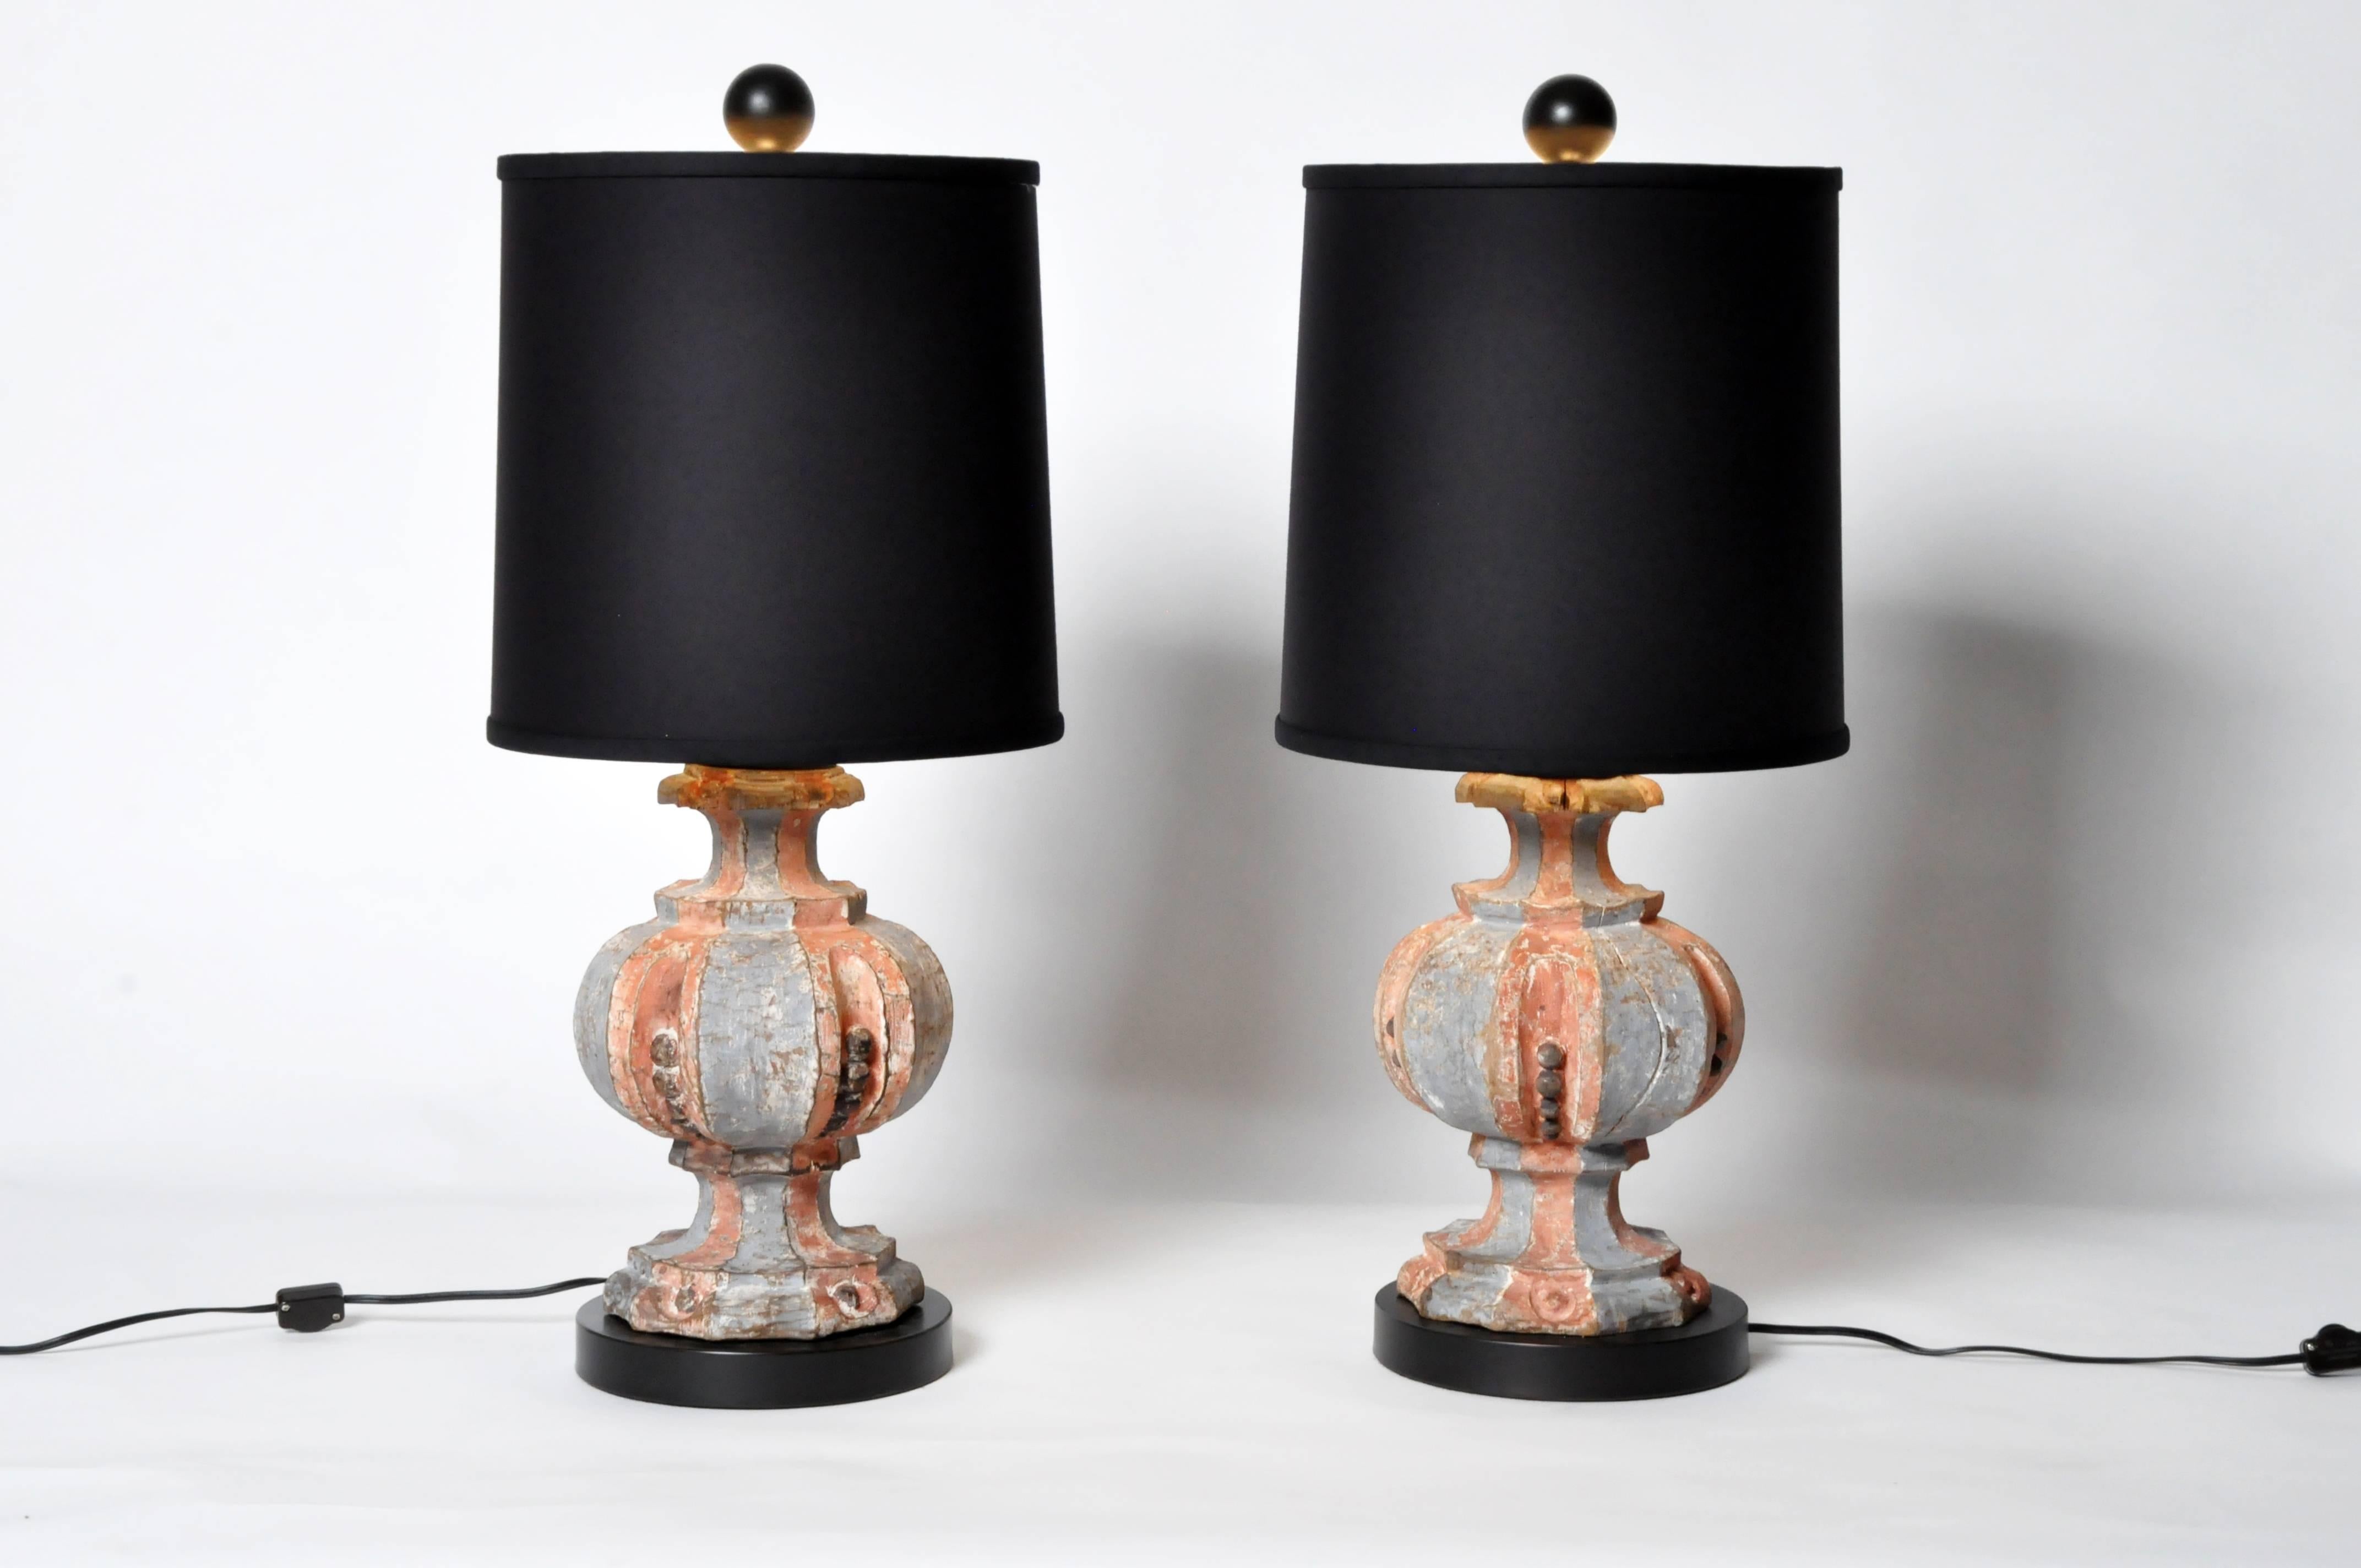 Add a hint of whimsy and romance to your living space with this pair of well-weathered 17th century finals in alternating shades of pink and blue that have been converted to table lamps. 